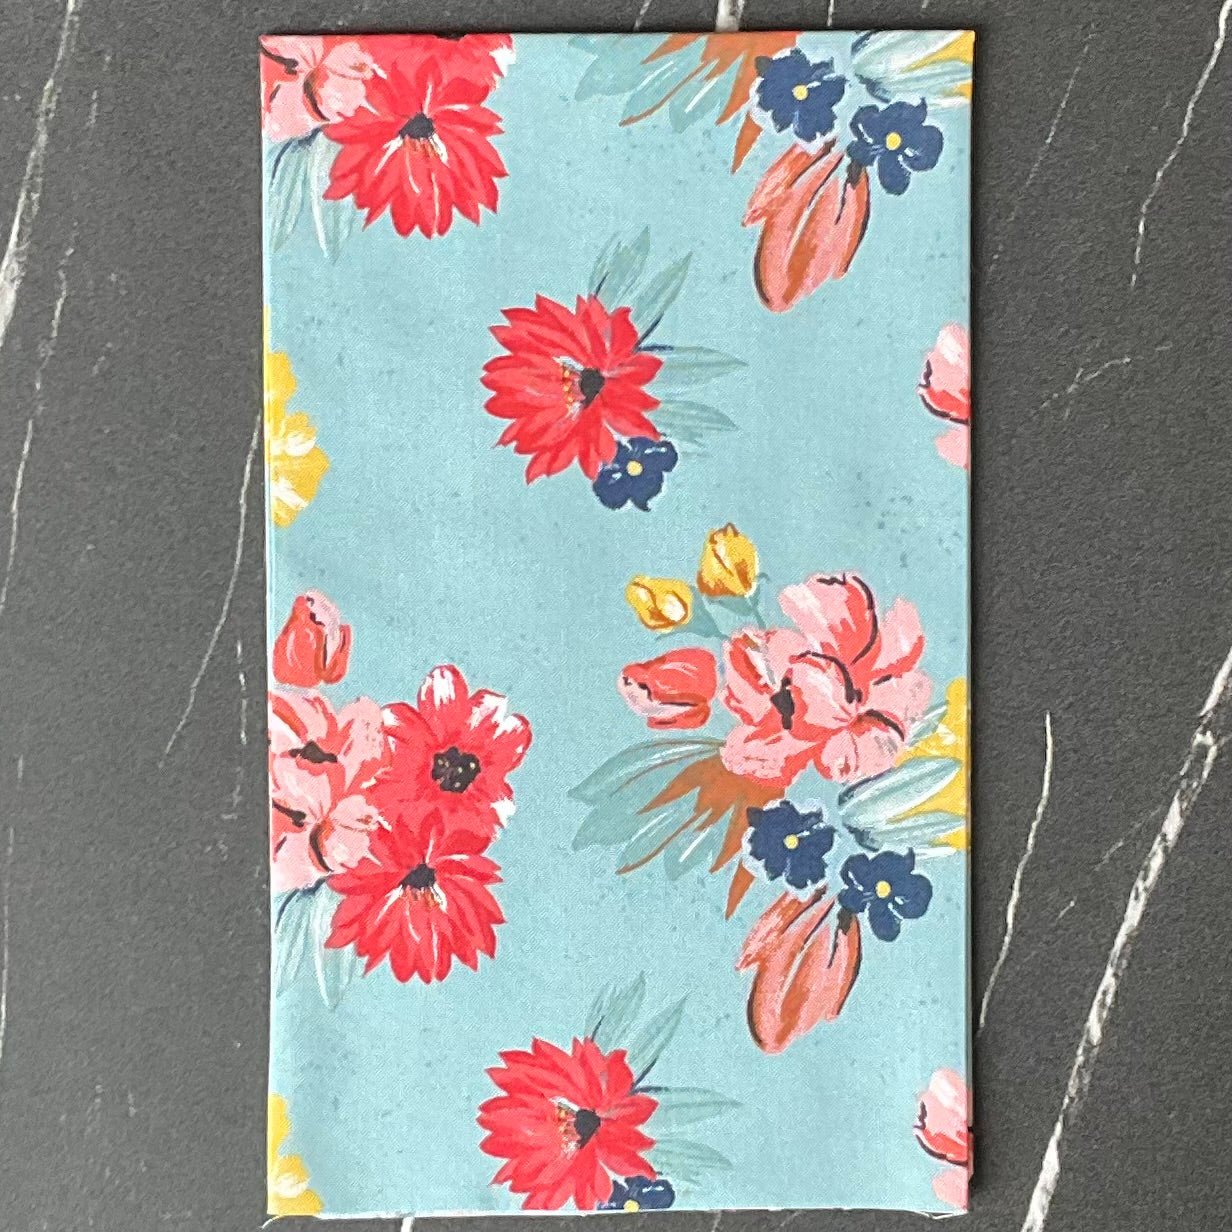 Wild Rose by RBD Designers : Floral Blue